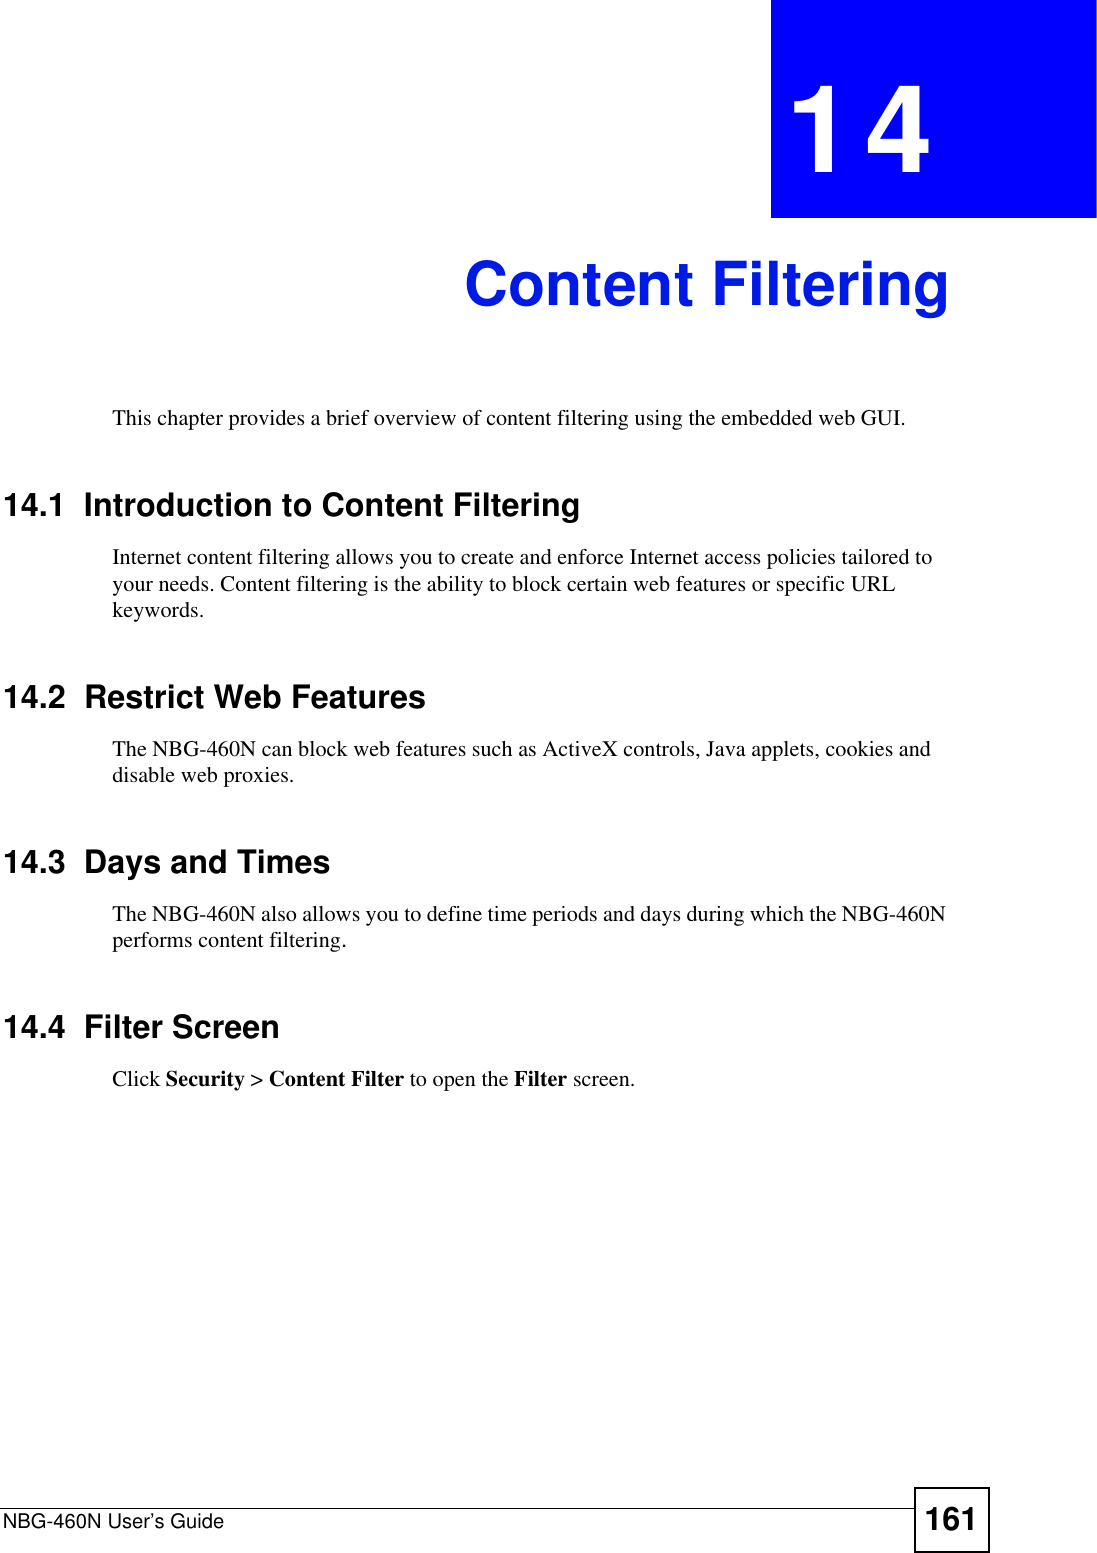 NBG-460N User’s Guide 161CHAPTER 14Content FilteringThis chapter provides a brief overview of content filtering using the embedded web GUI.14.1  Introduction to Content FilteringInternet content filtering allows you to create and enforce Internet access policies tailored to your needs. Content filtering is the ability to block certain web features or specific URL keywords.14.2  Restrict Web FeaturesThe NBG-460N can block web features such as ActiveX controls, Java applets, cookies and disable web proxies. 14.3  Days and TimesThe NBG-460N also allows you to define time periods and days during which the NBG-460N performs content filtering.14.4  Filter ScreenClick Security &gt; Content Filter to open the Filter screen. 